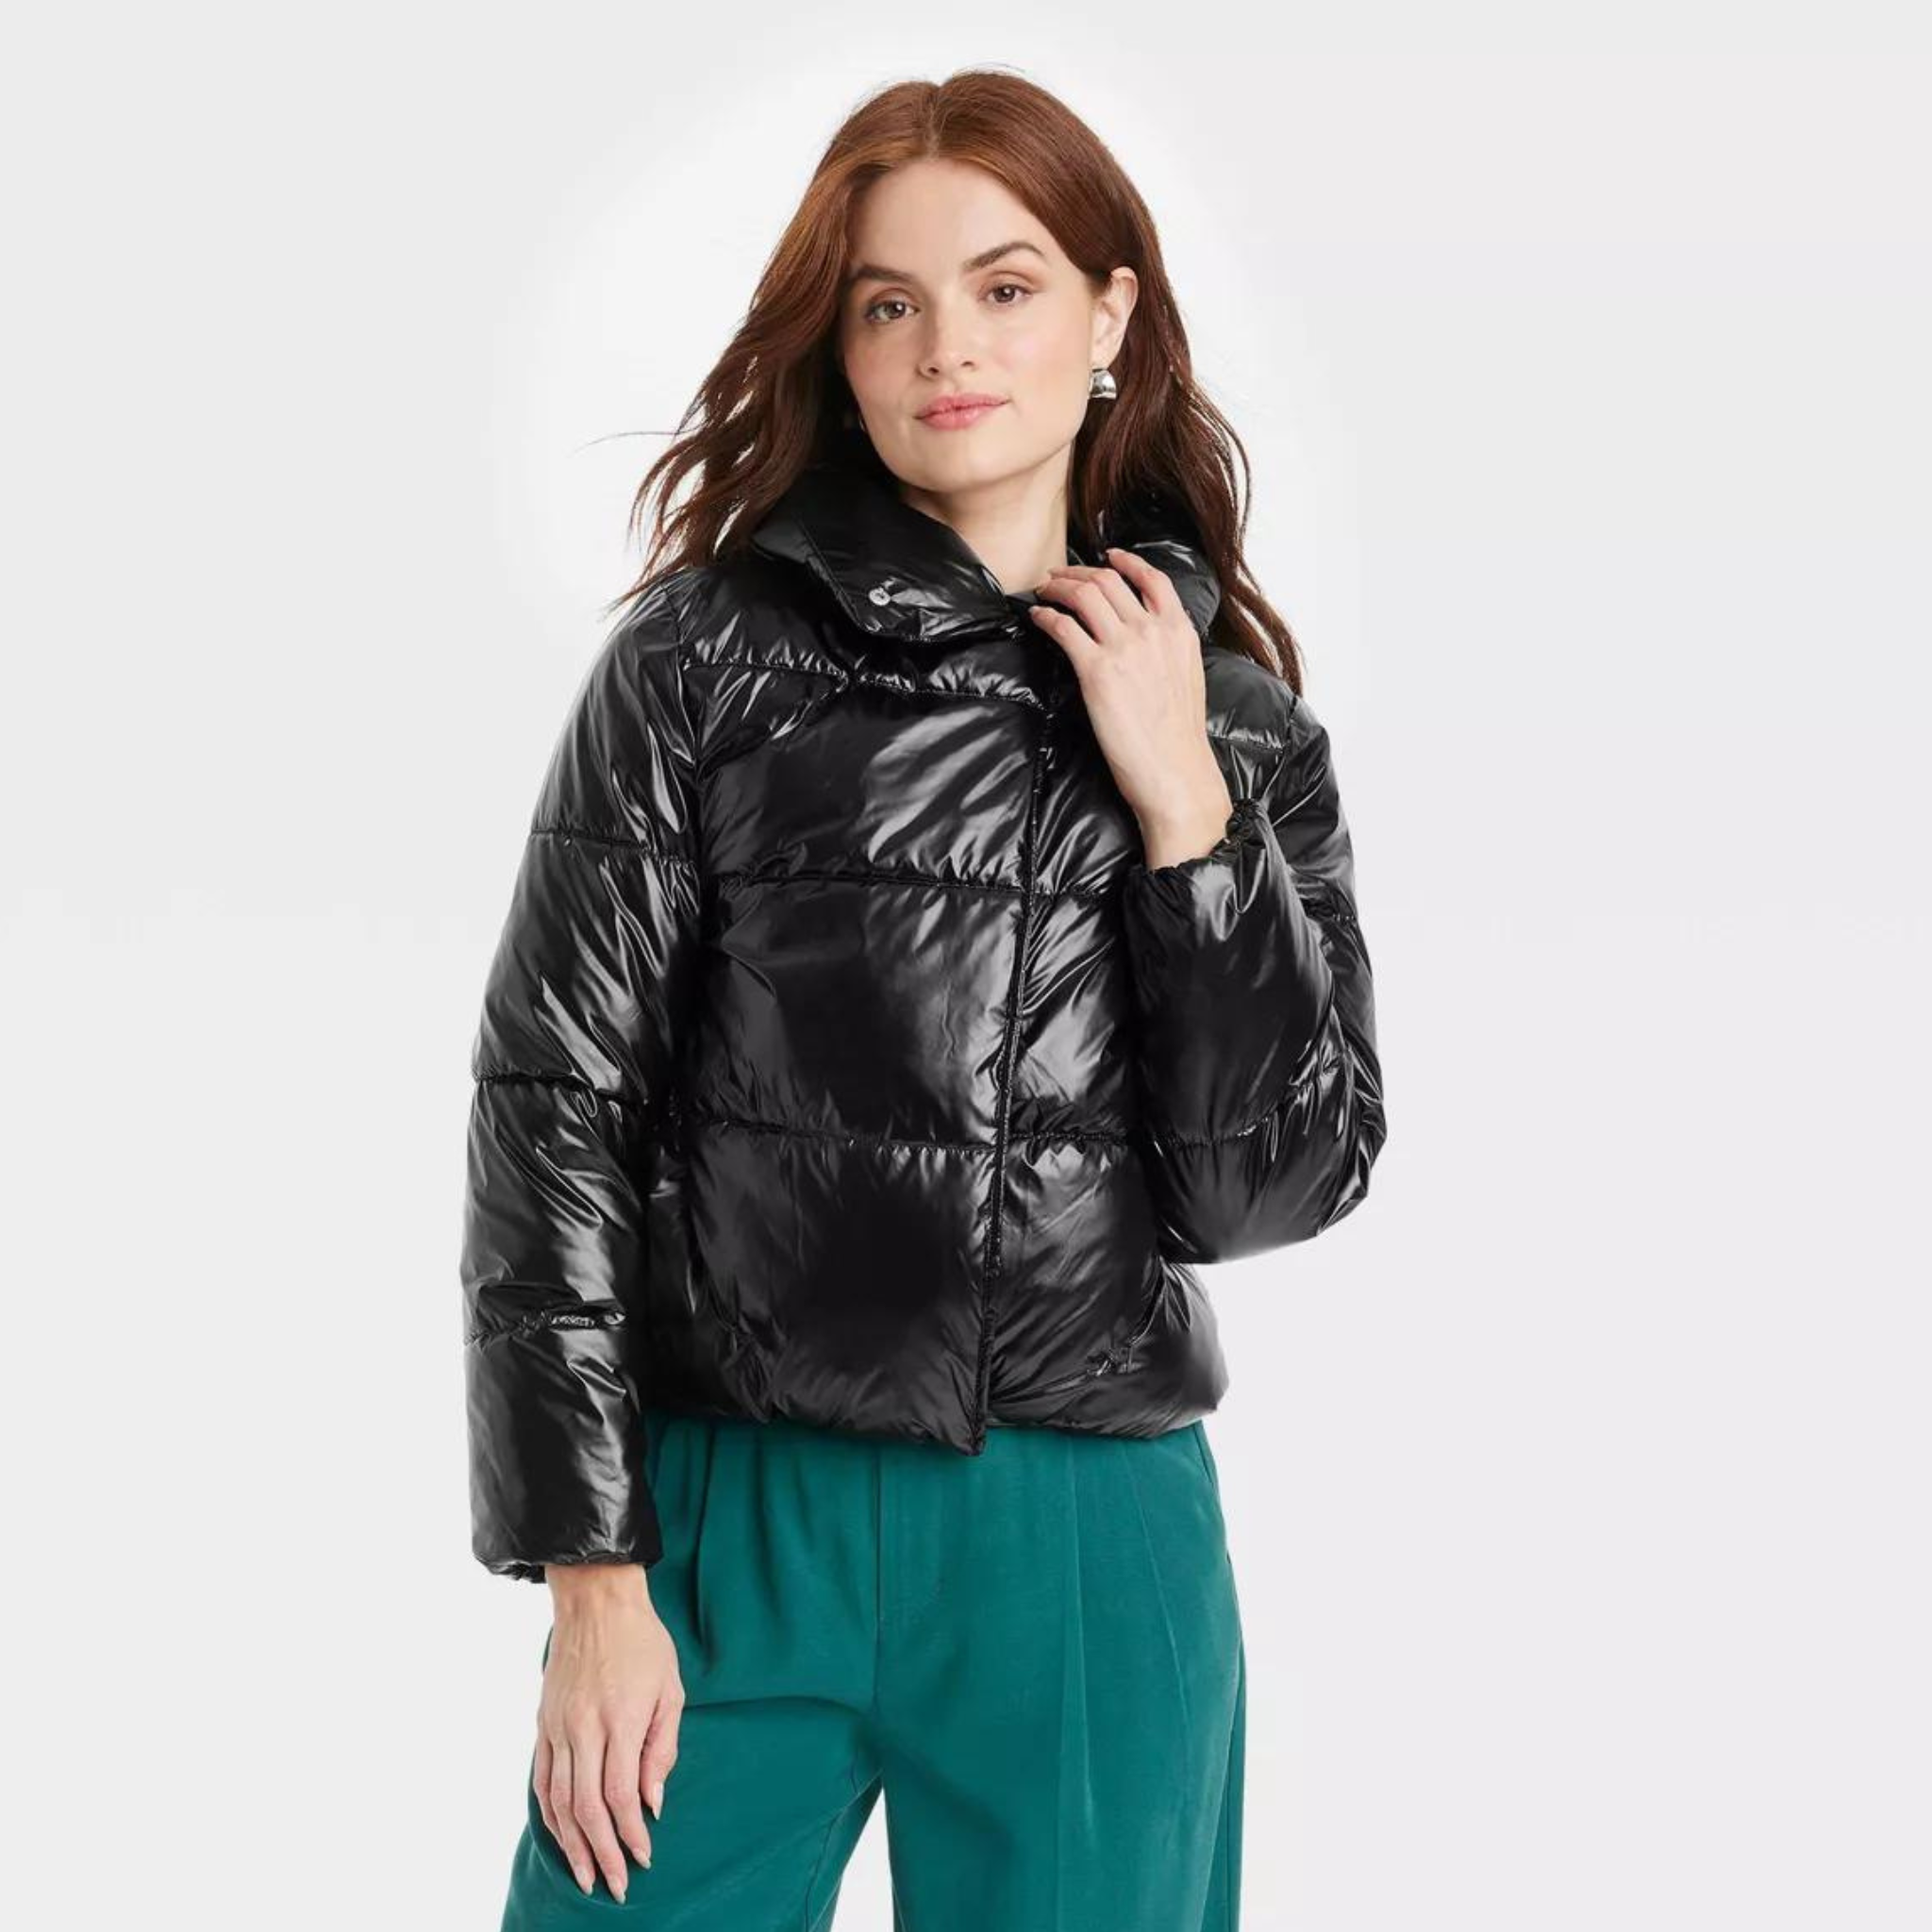 Target Women's Short Puffer Jacket (MANY COLORS)!